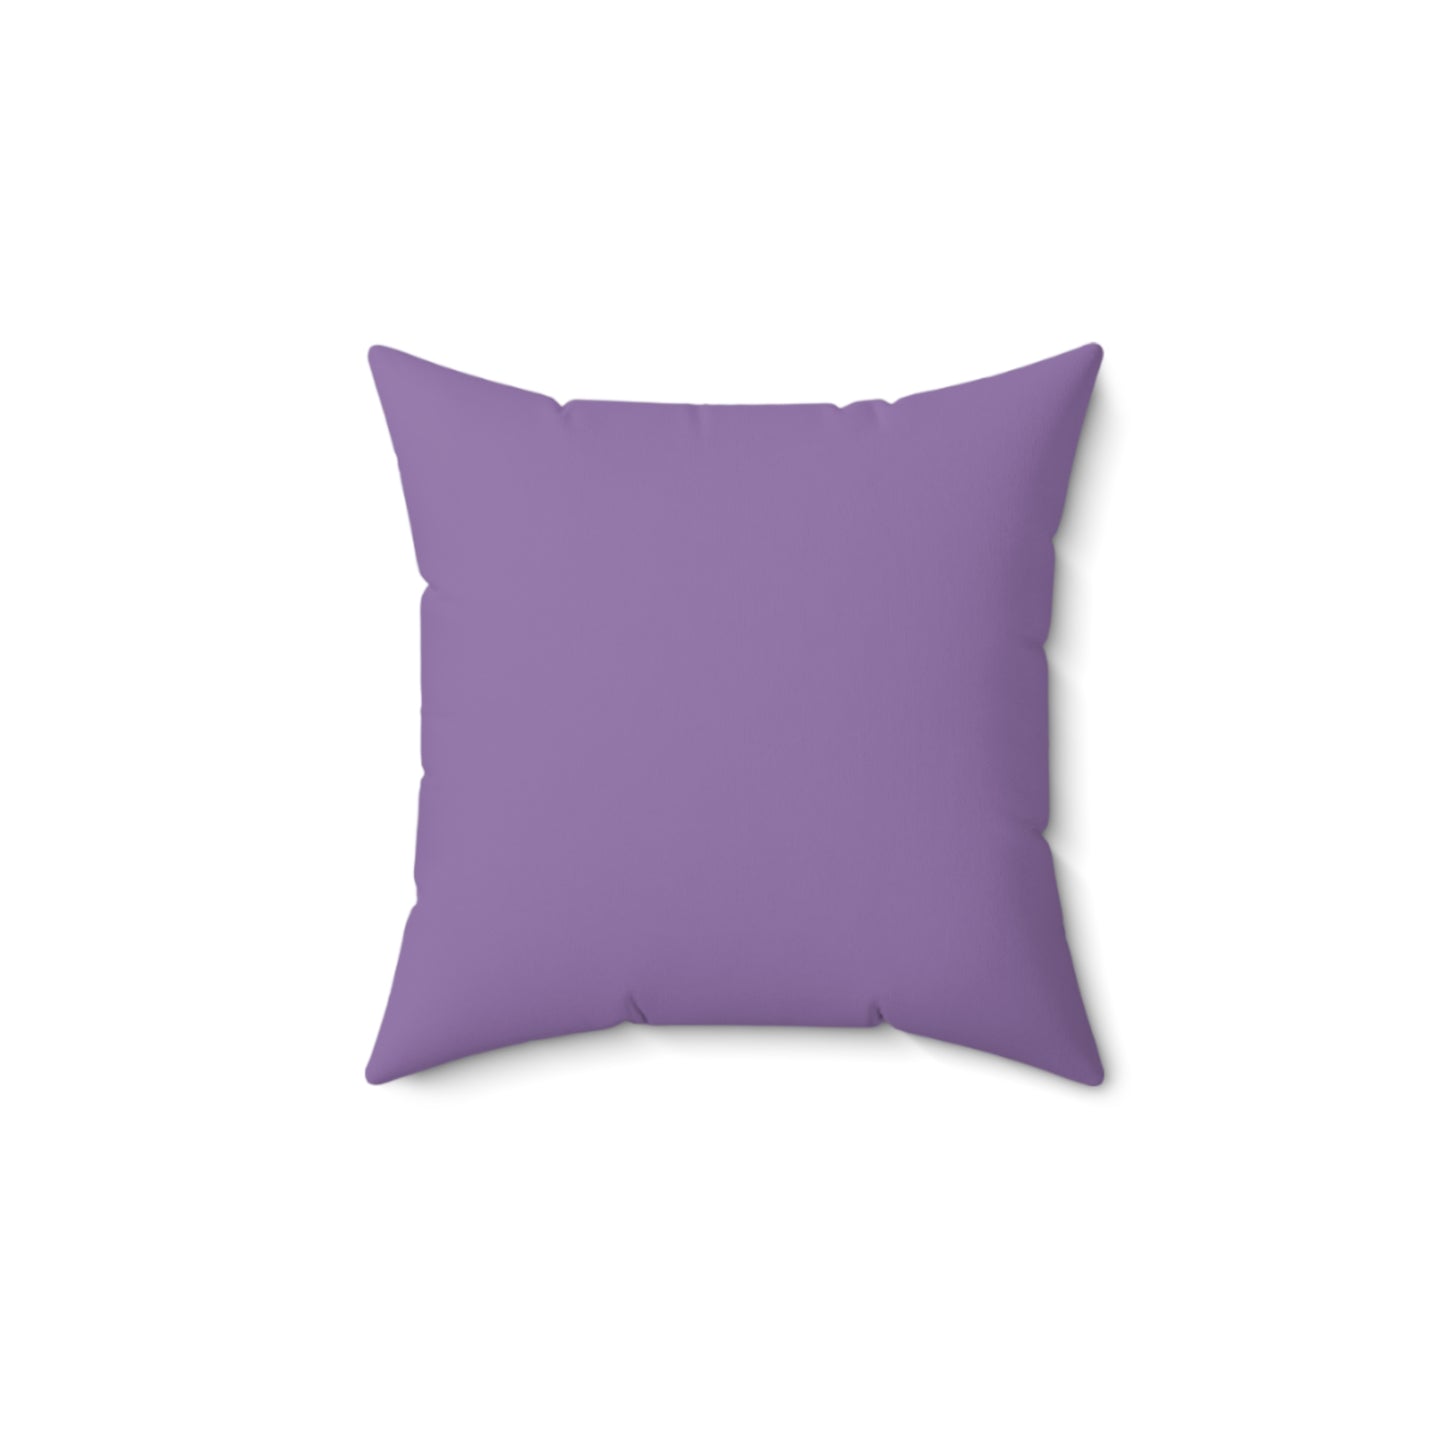 Faux Suede Throw Pillow - Mountain's Lavender